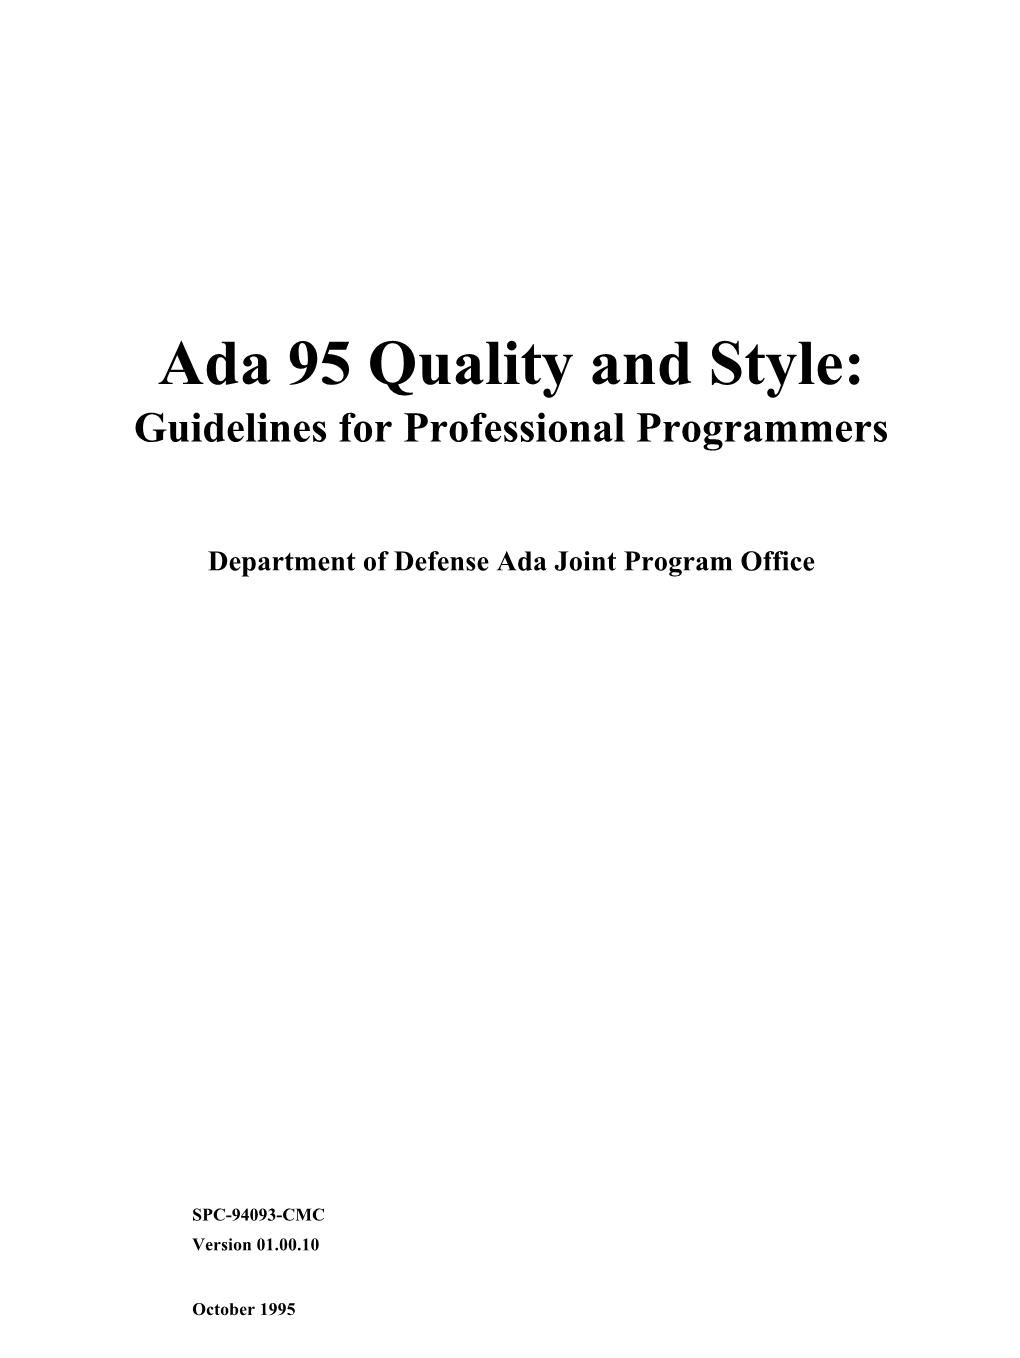 Ada 95 Quality and Style: Guidelines for Professional Programmers